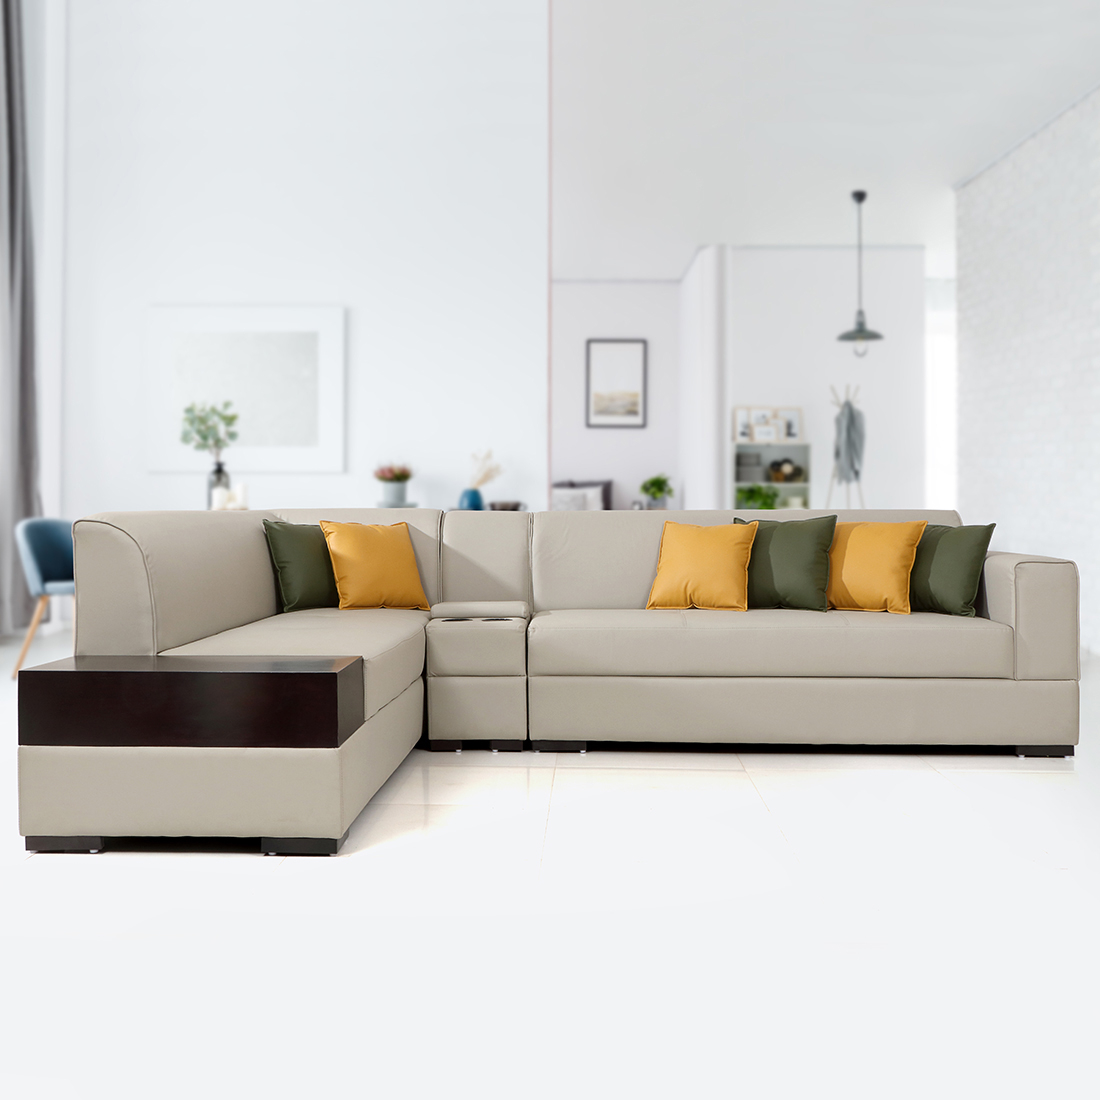 Alden Leatherette Lhs Sofa With